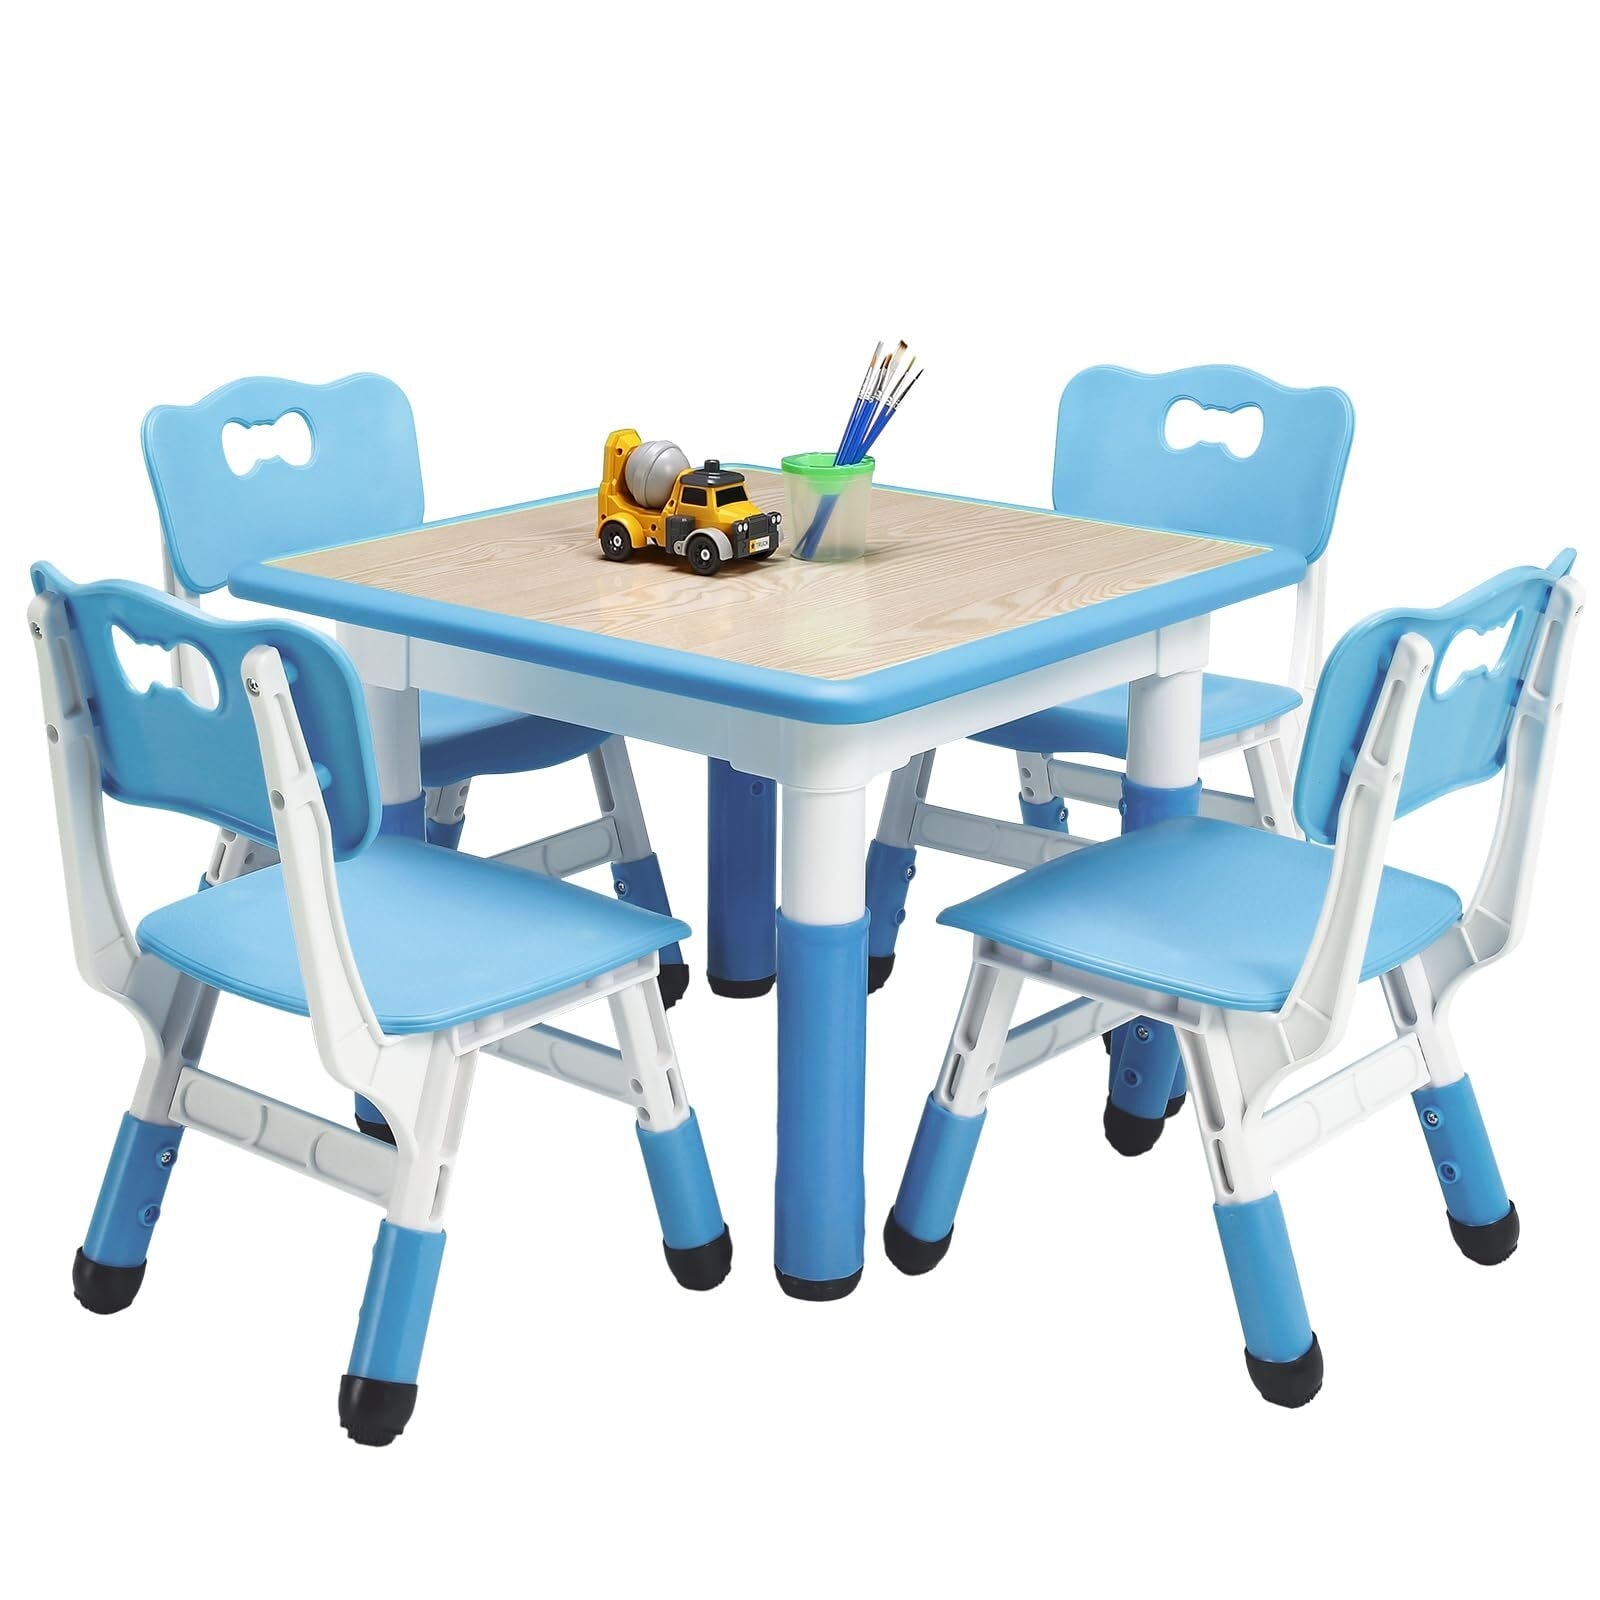 Kids Table and Chairs Set, Height Adjustable Desk with 4 Seats for Ages 2-10